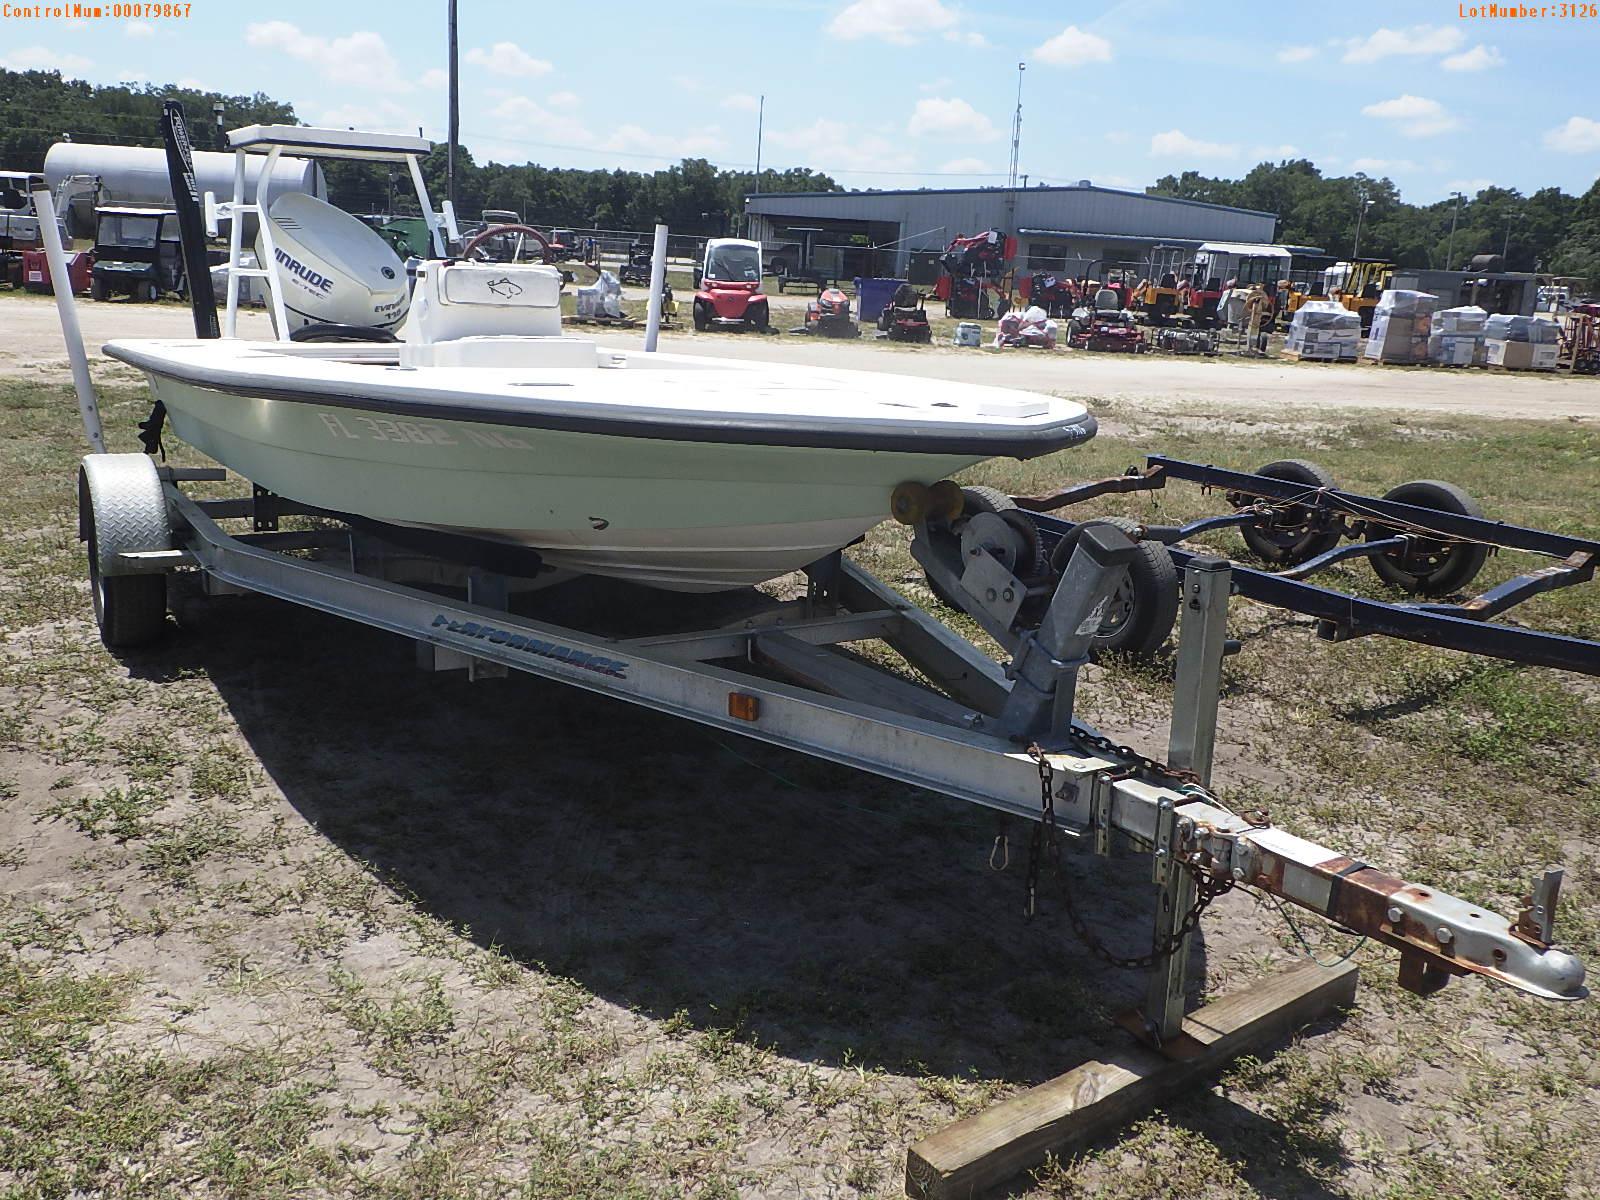 5-03126 (Vessels-Center console)  Seller:Private/Dealer 2007 RFIS BULLRED